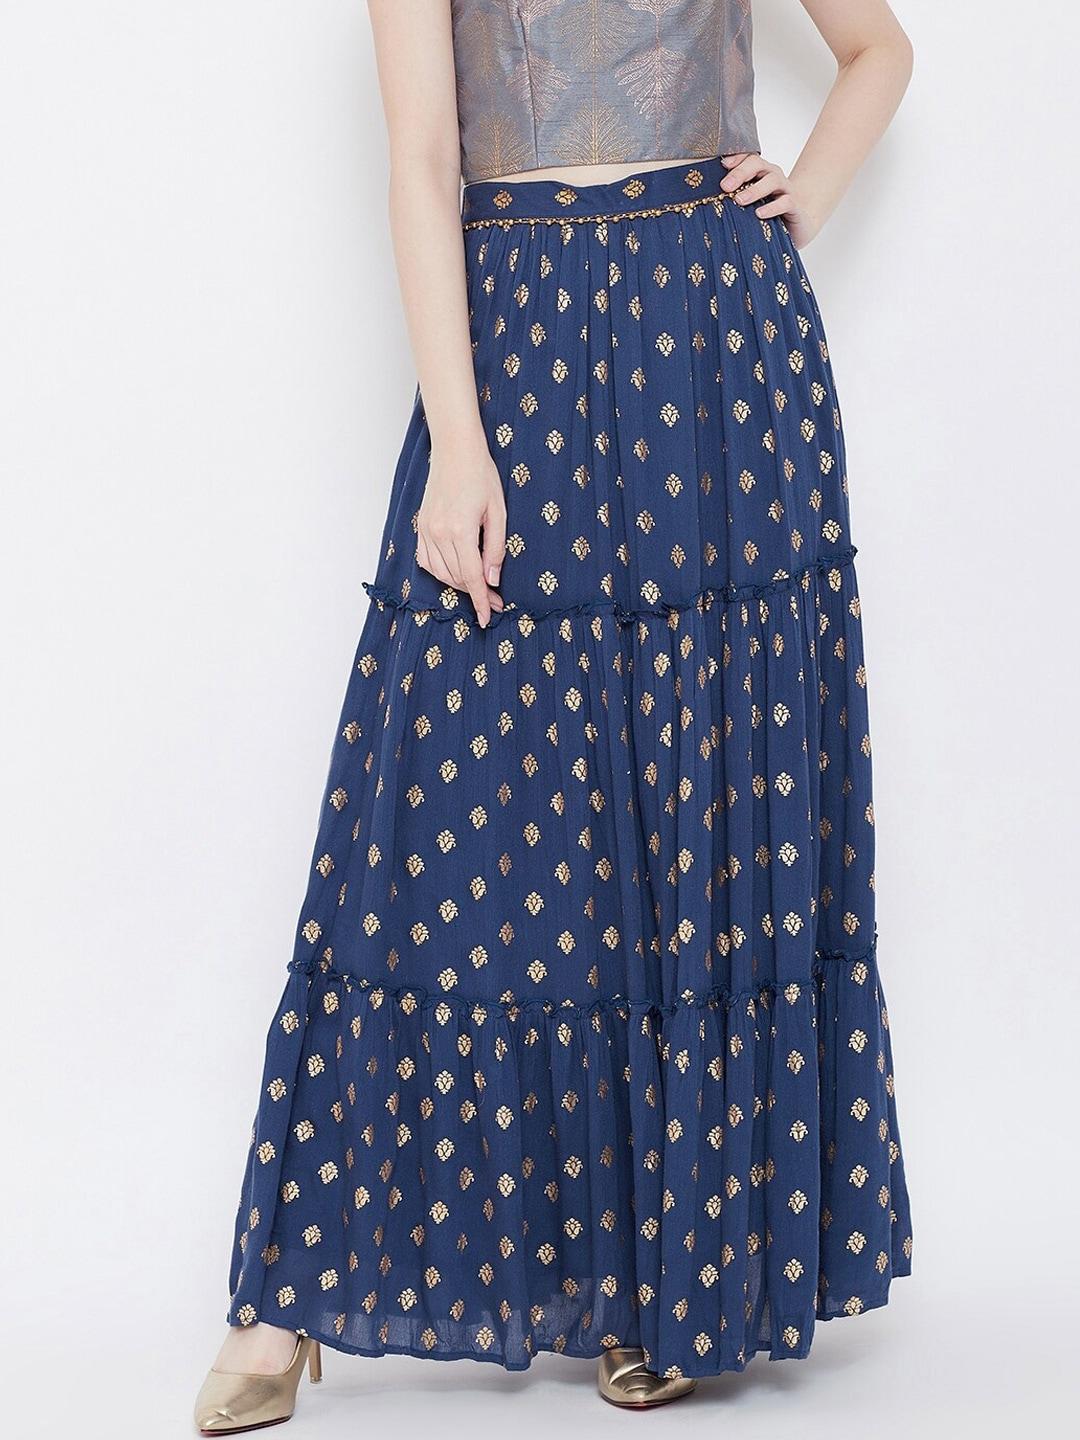 be indi women navy-blue printed tiered flared skirt